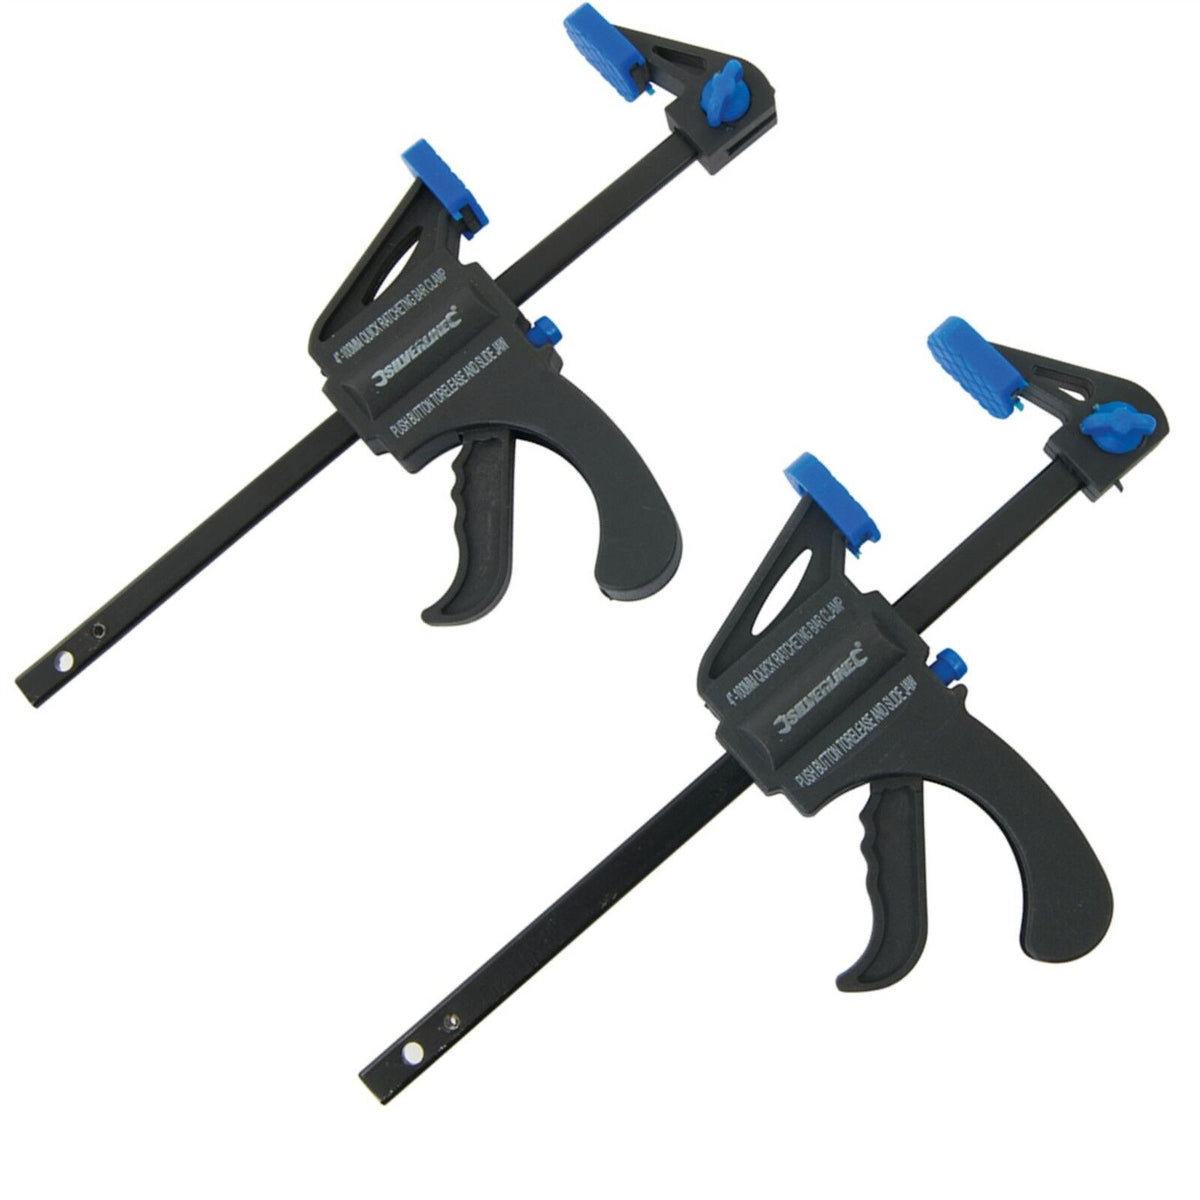 2 x 100mm Ratchet Mini Speed Clamps Woodworking Carpentry Crafts DIY Home